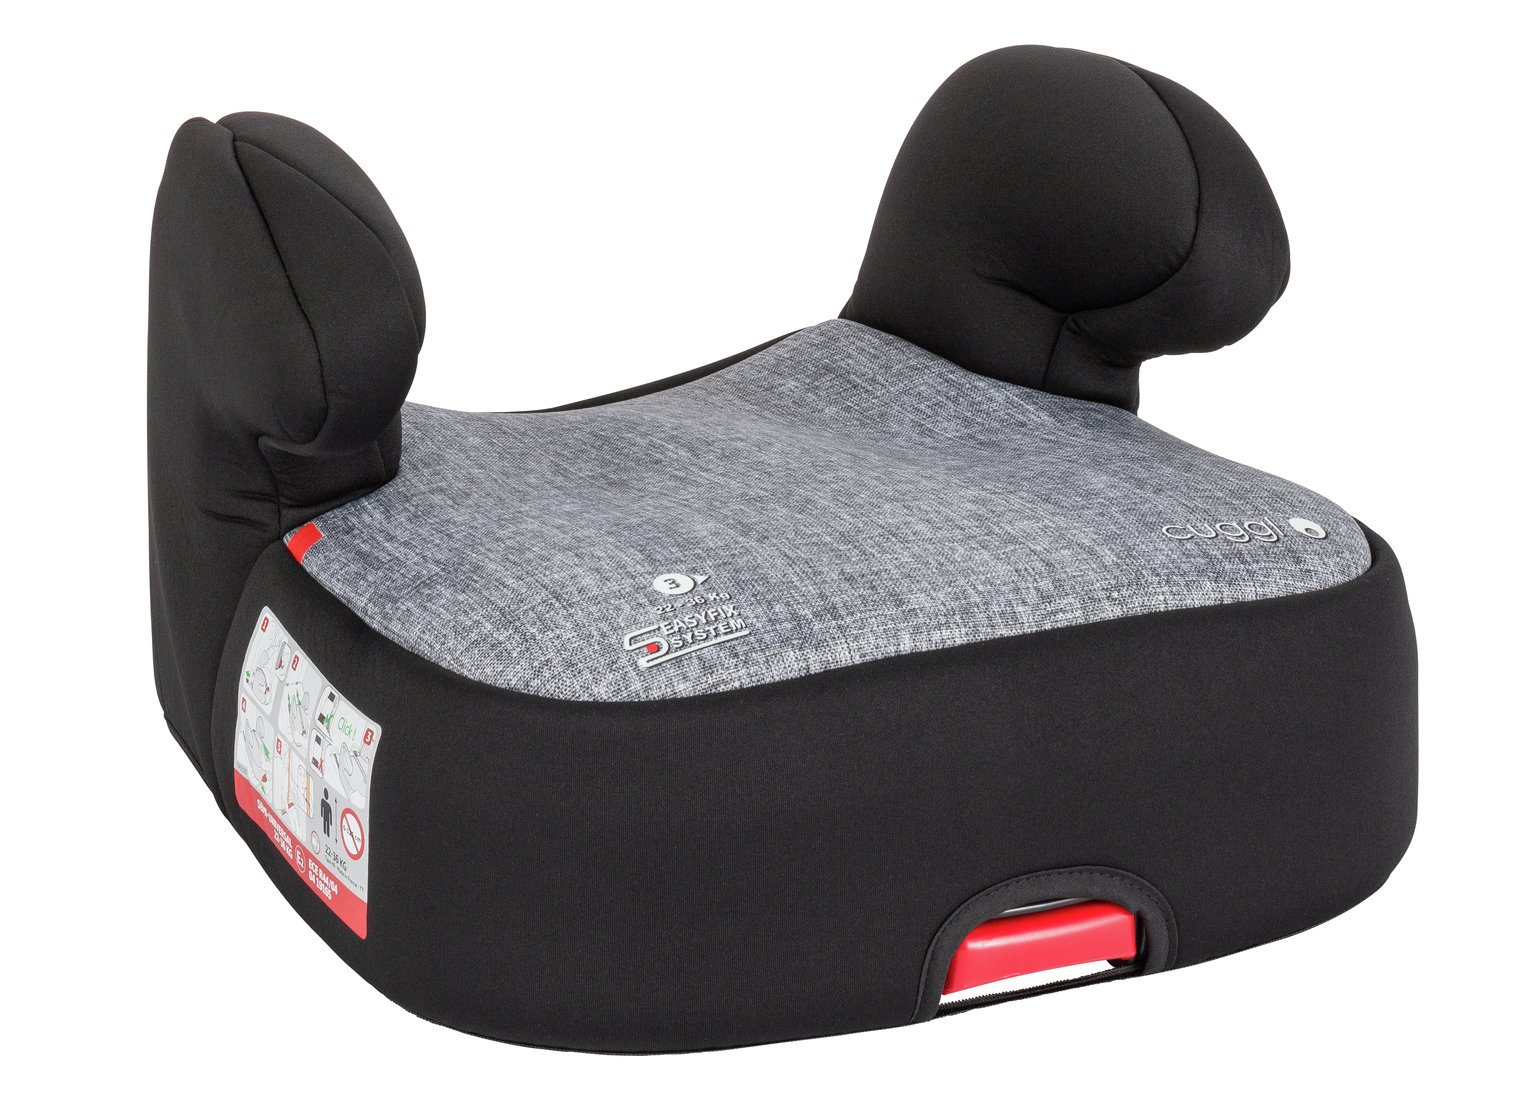 Cuggl Silver Deluxe Easyfix Booster Seat Review